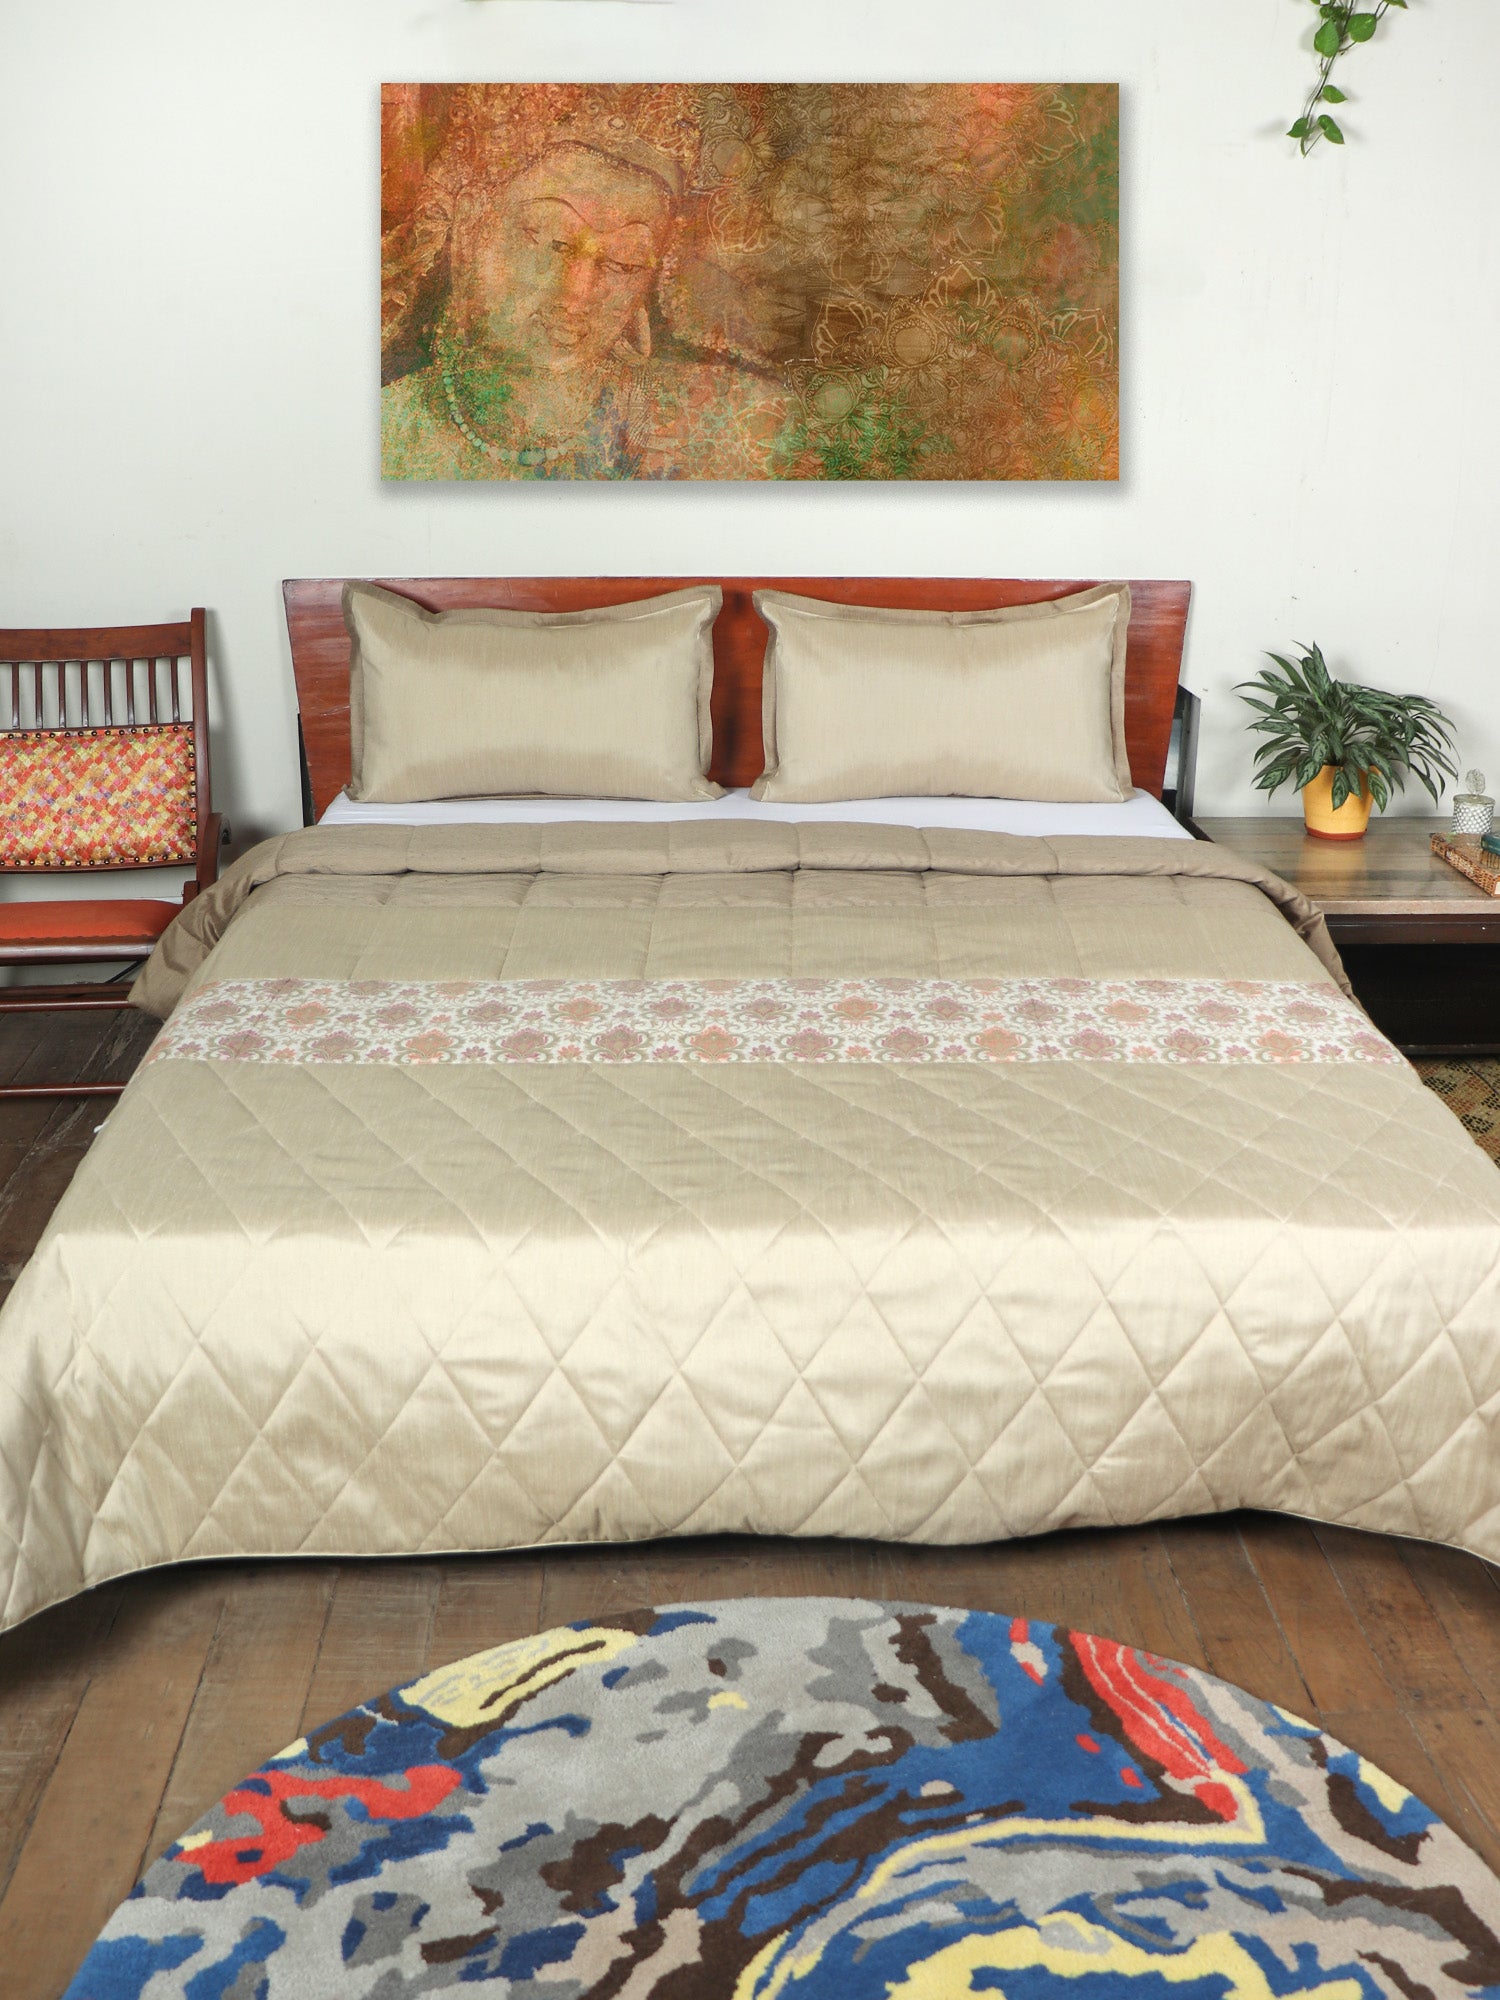 Quilt for Double Bed King Size | Square and Diamond Quilting with Brocade Silk Patch | AC Comfortor/Blanket/Duvet | Polyester Blend - Golden Beige | 108x108+17x27 inches (274x274 cms)